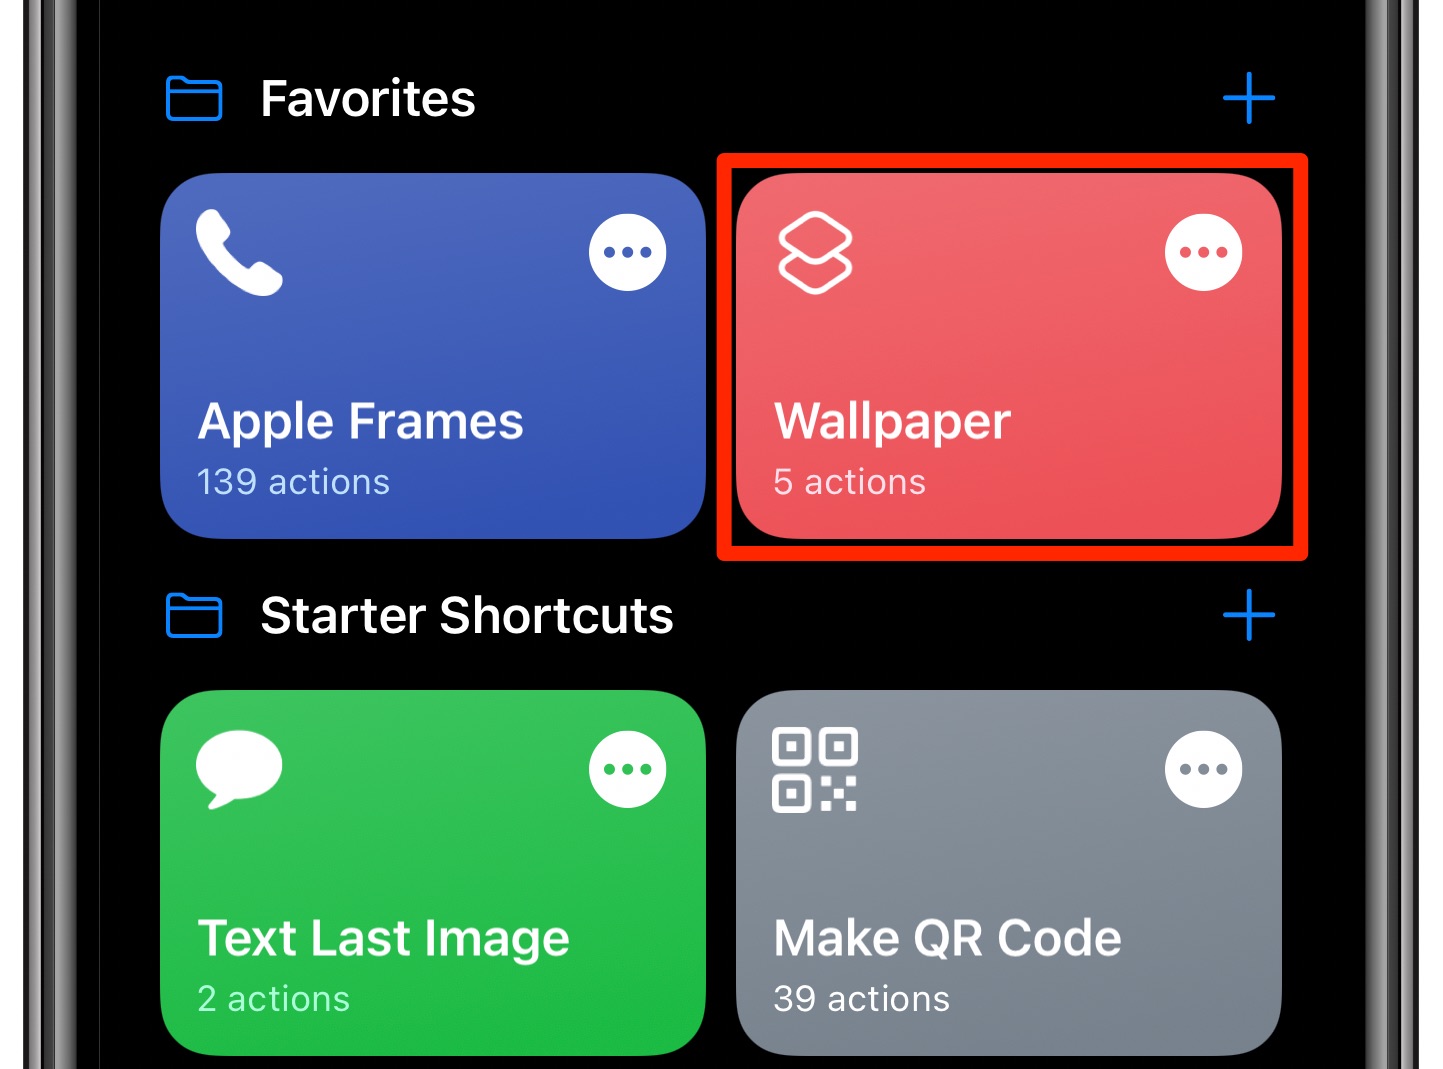 change iPhone wallpaper automatically - the Wallpaper script in the Shortcuts app